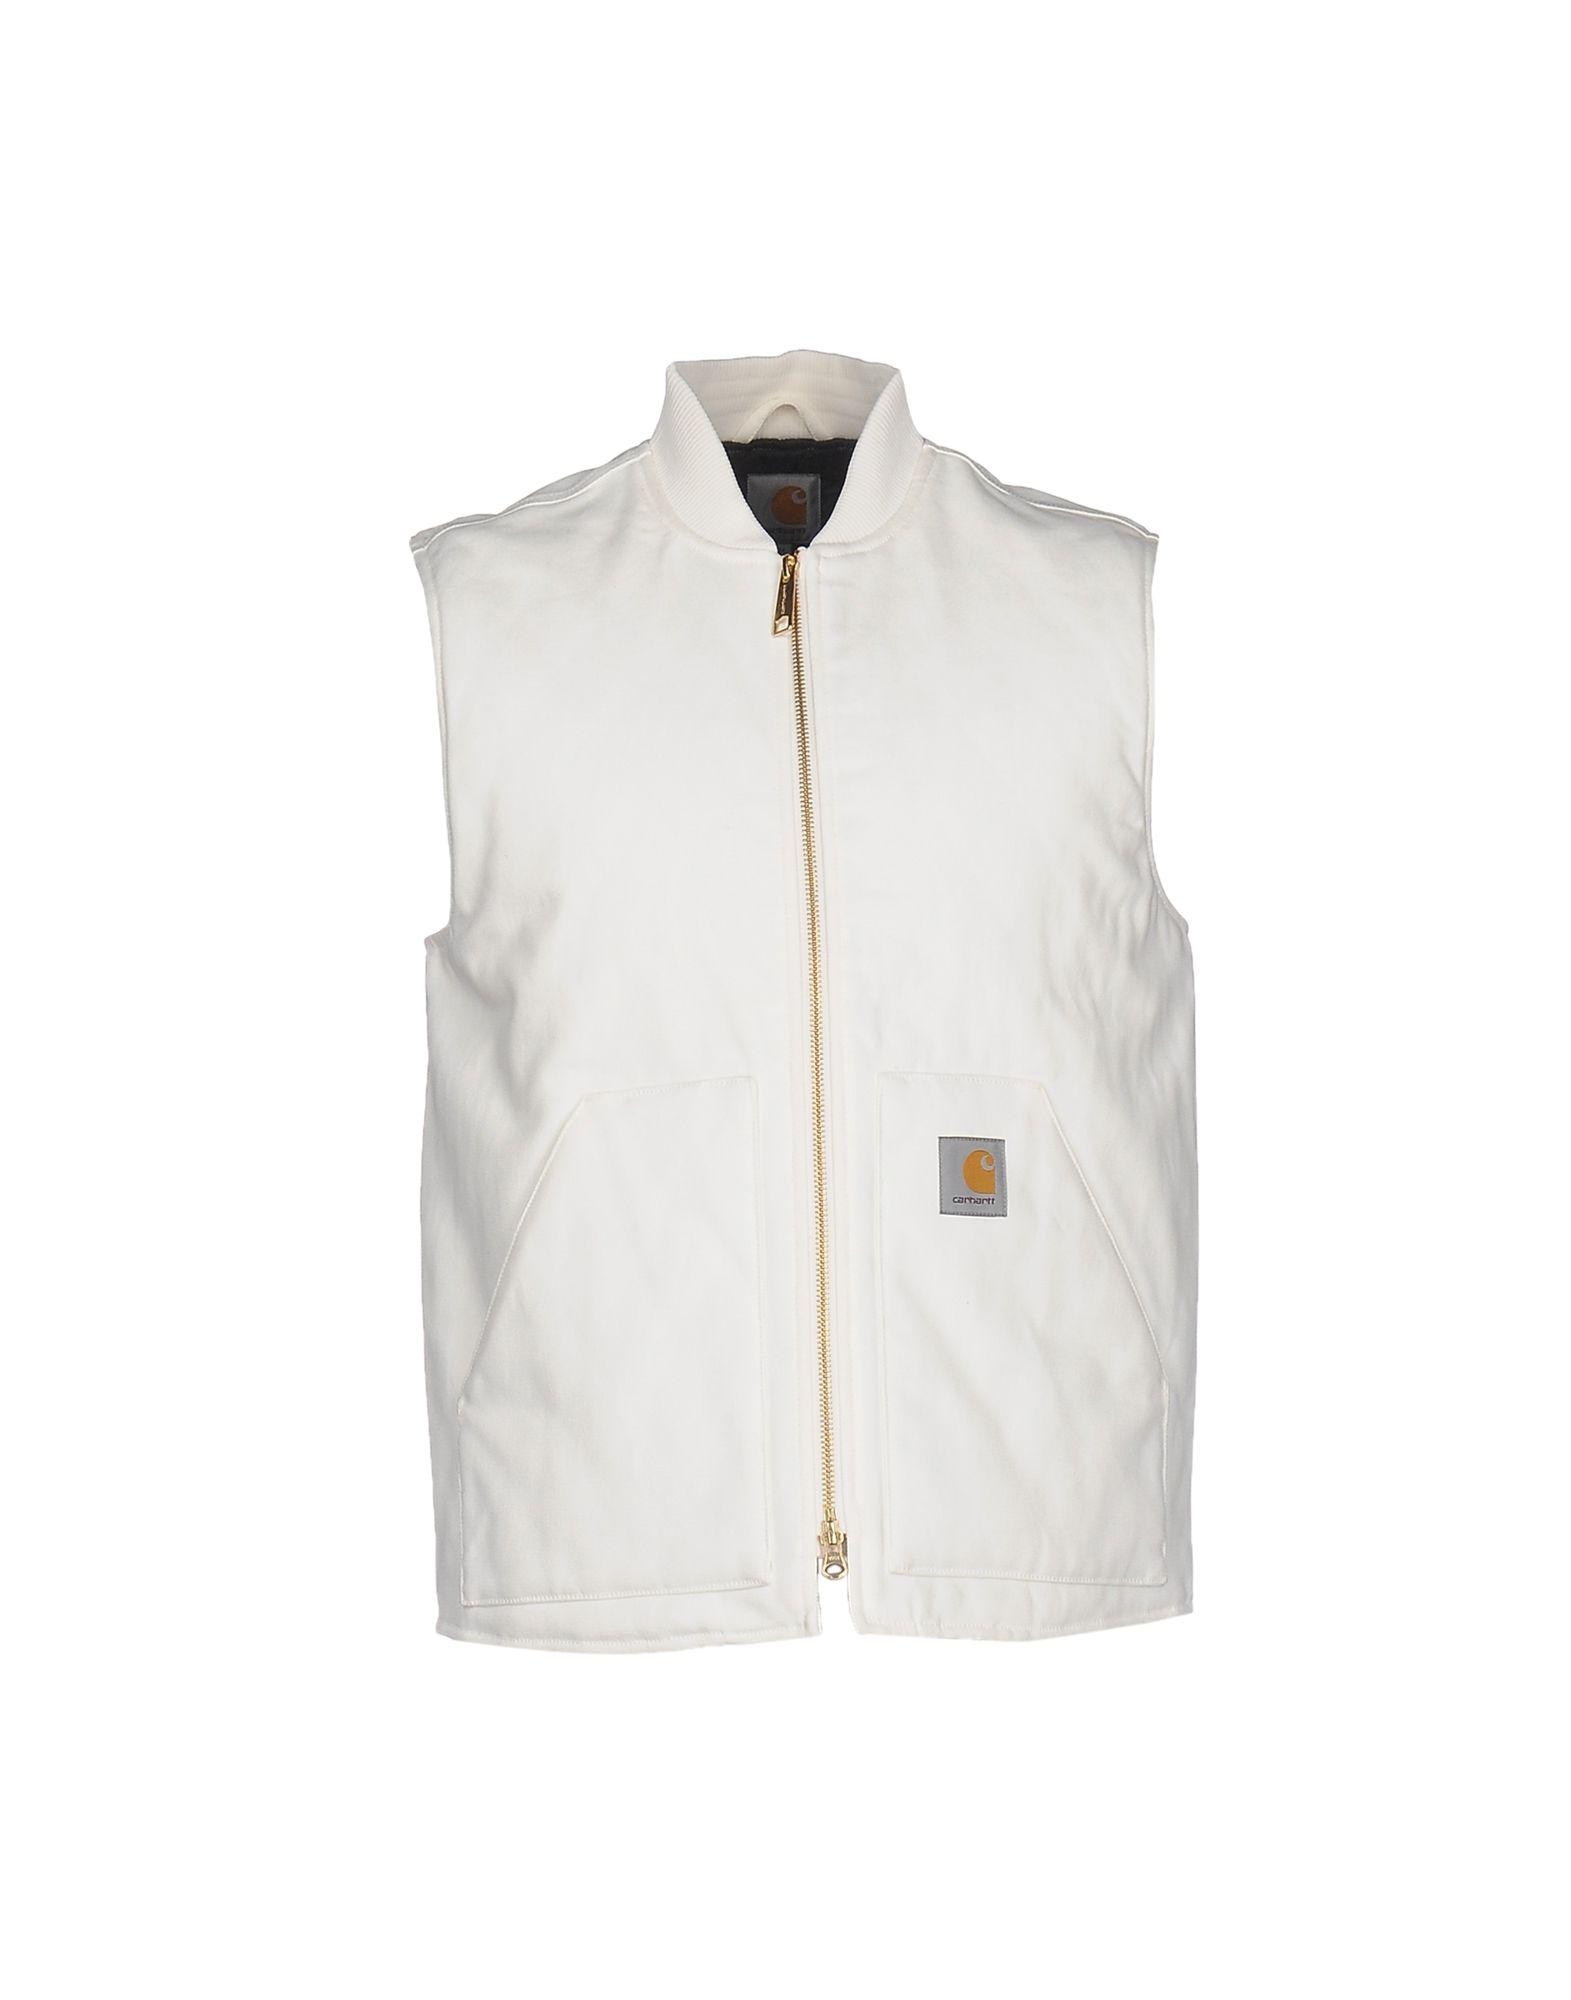 Carhartt Canvas Jacket in Ivory (White) for Men - Lyst